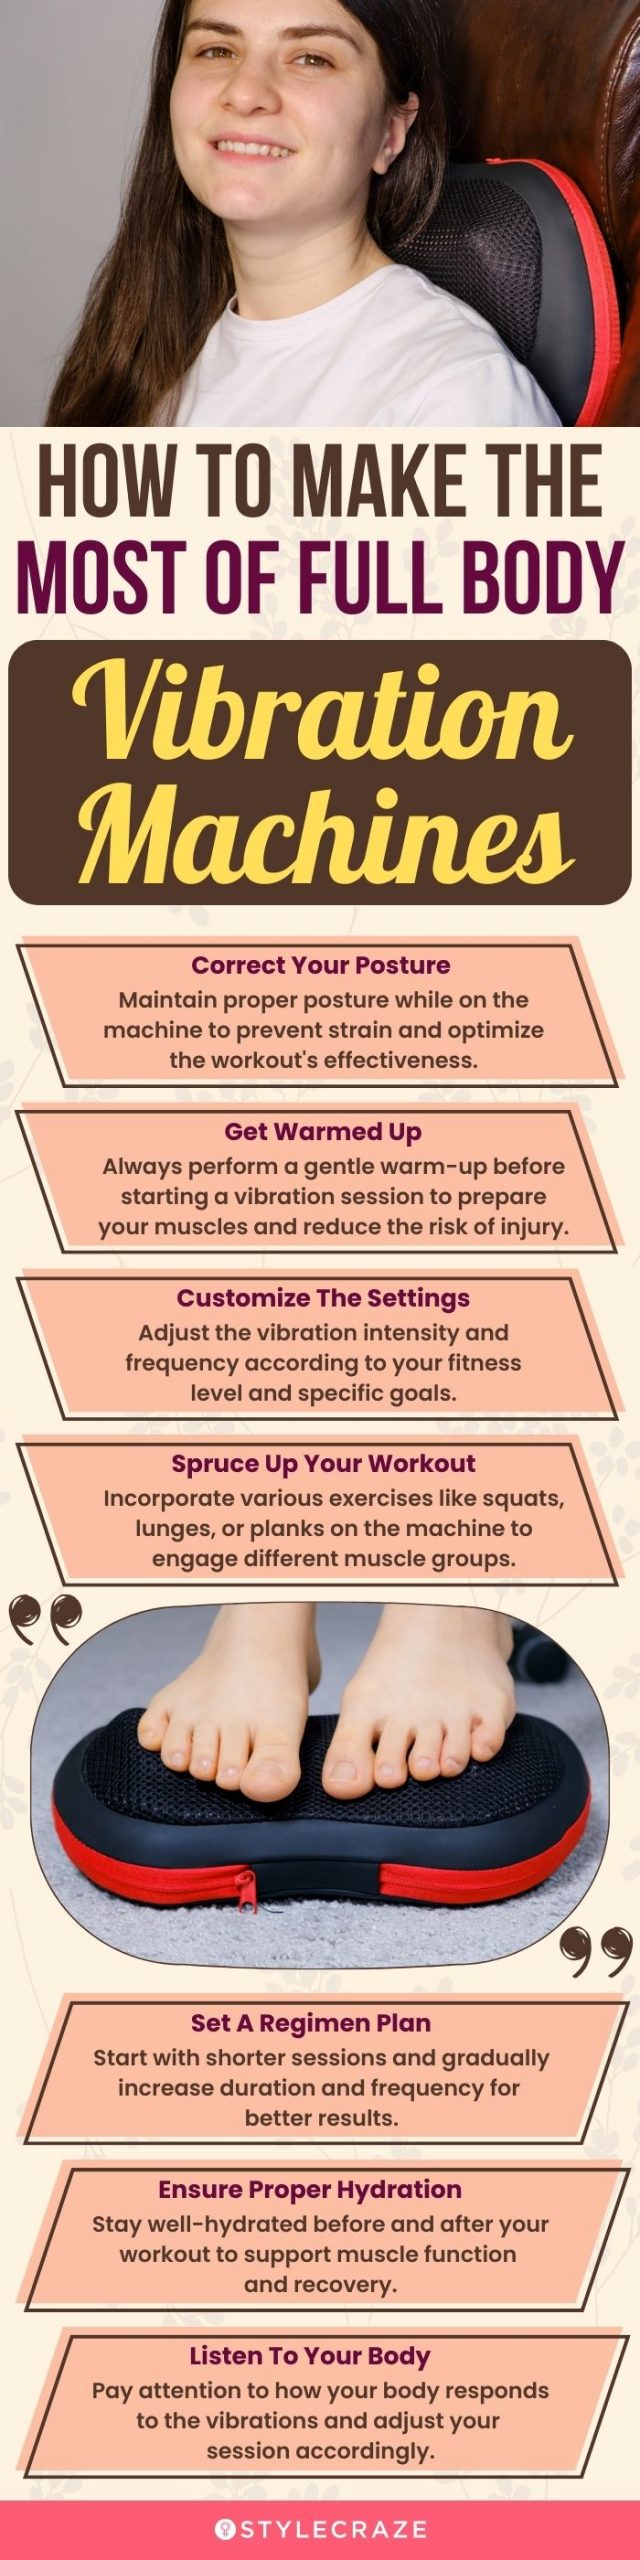 How To Make The Most Of Full Body Vibration Machines (infographic)